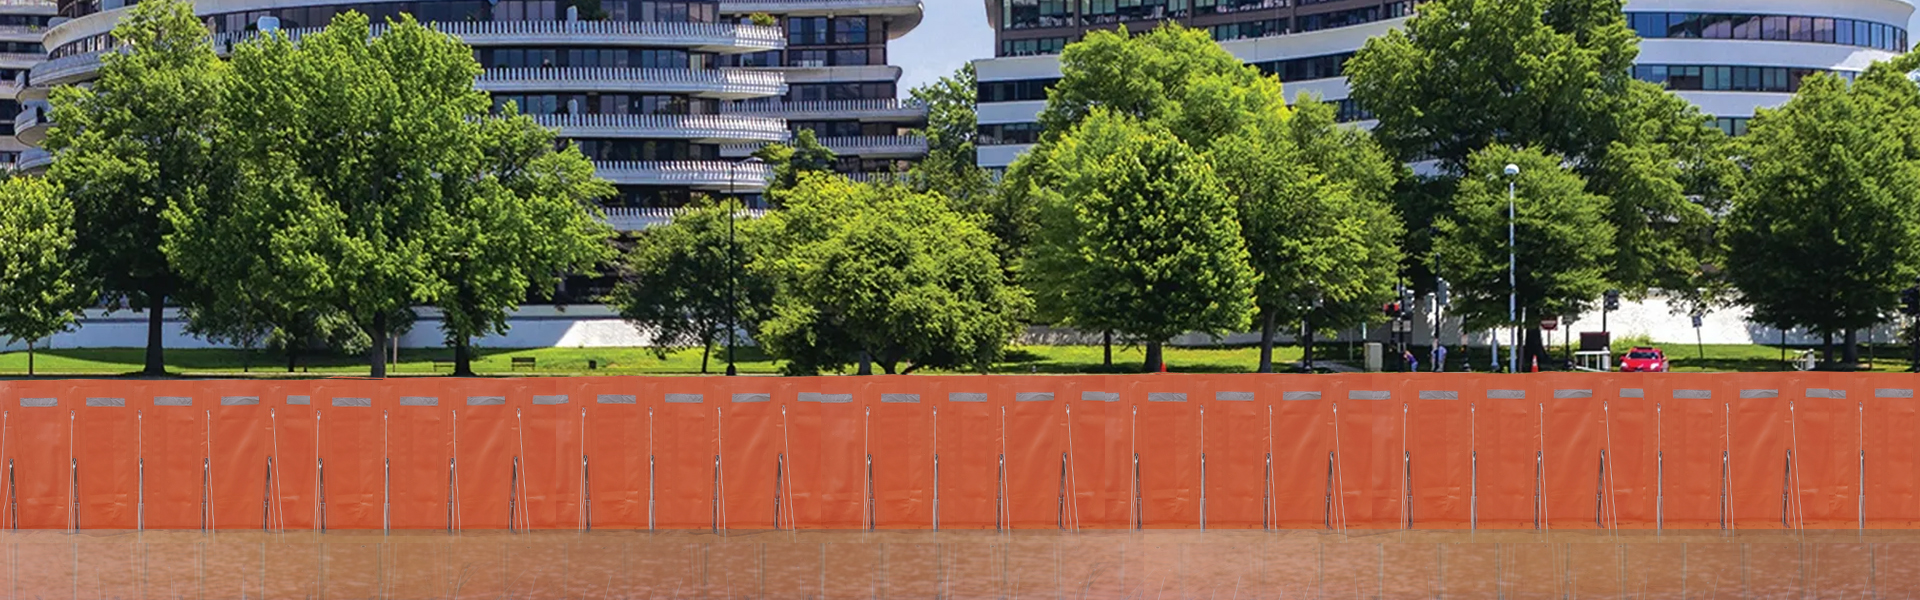 flood barrier,water gate,water barrier,flood protection